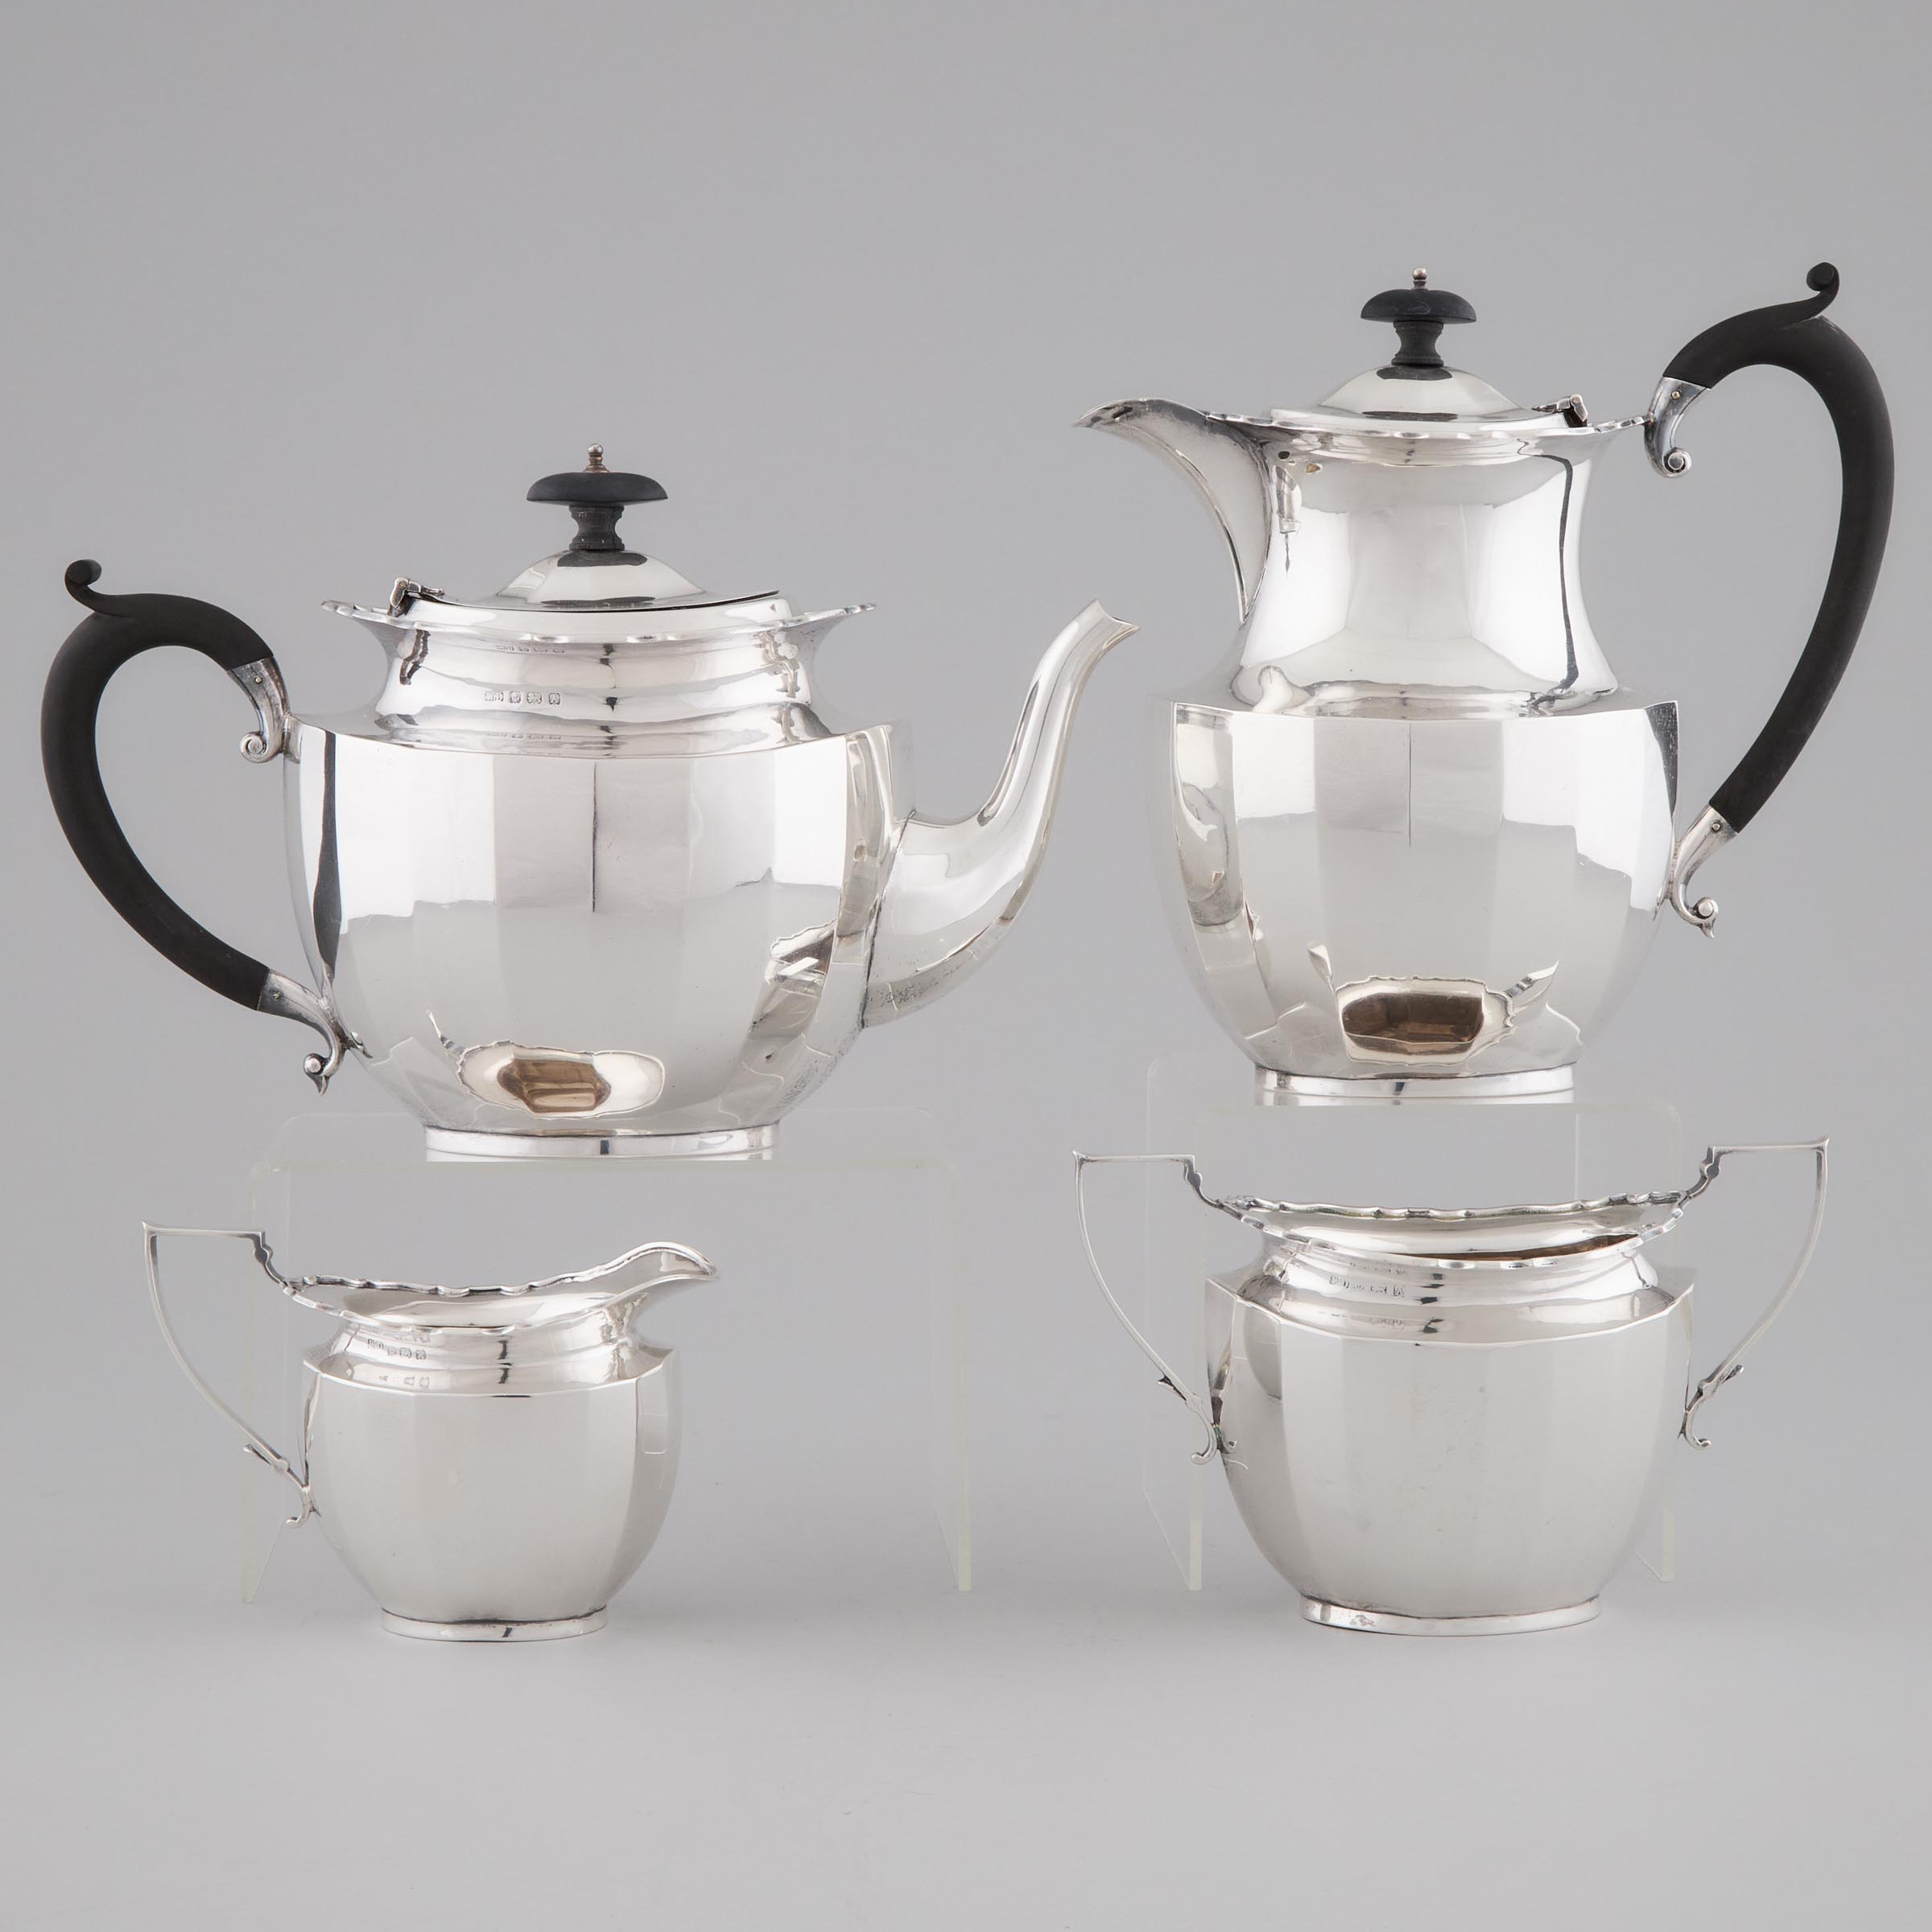 English Silver Tea and Coffee Service  2fb03d0